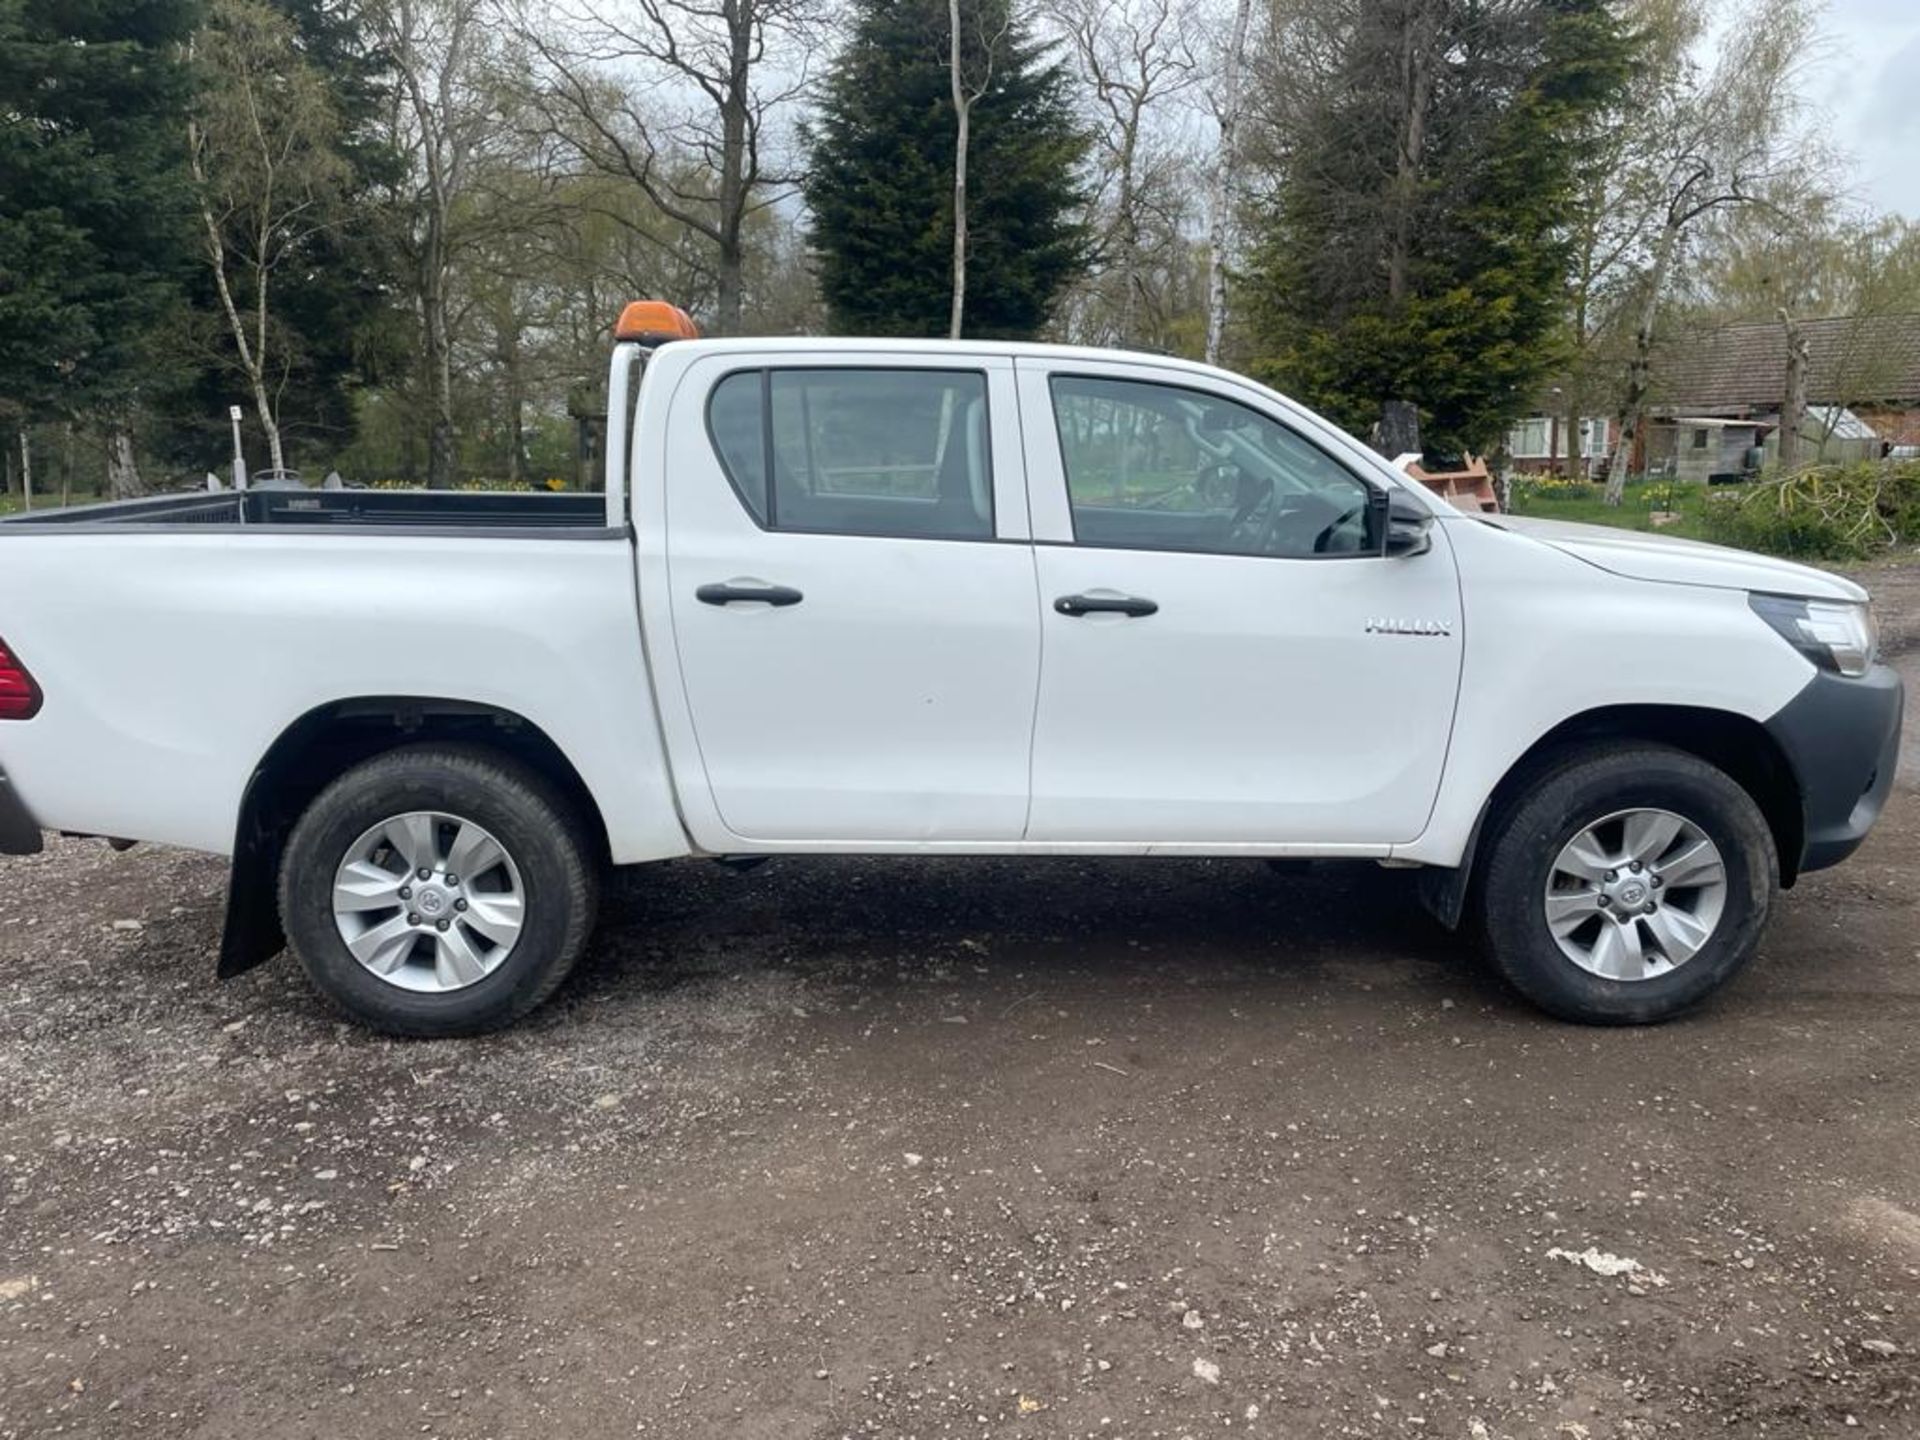 2018/18 REG TOYOTA HILUX ACTIVE D-4D 4WD DCB 2.4 DIESEL WHITE 4X4, SHOWING 1 FORMER KEEPER *PLUS VAT - Image 8 of 13